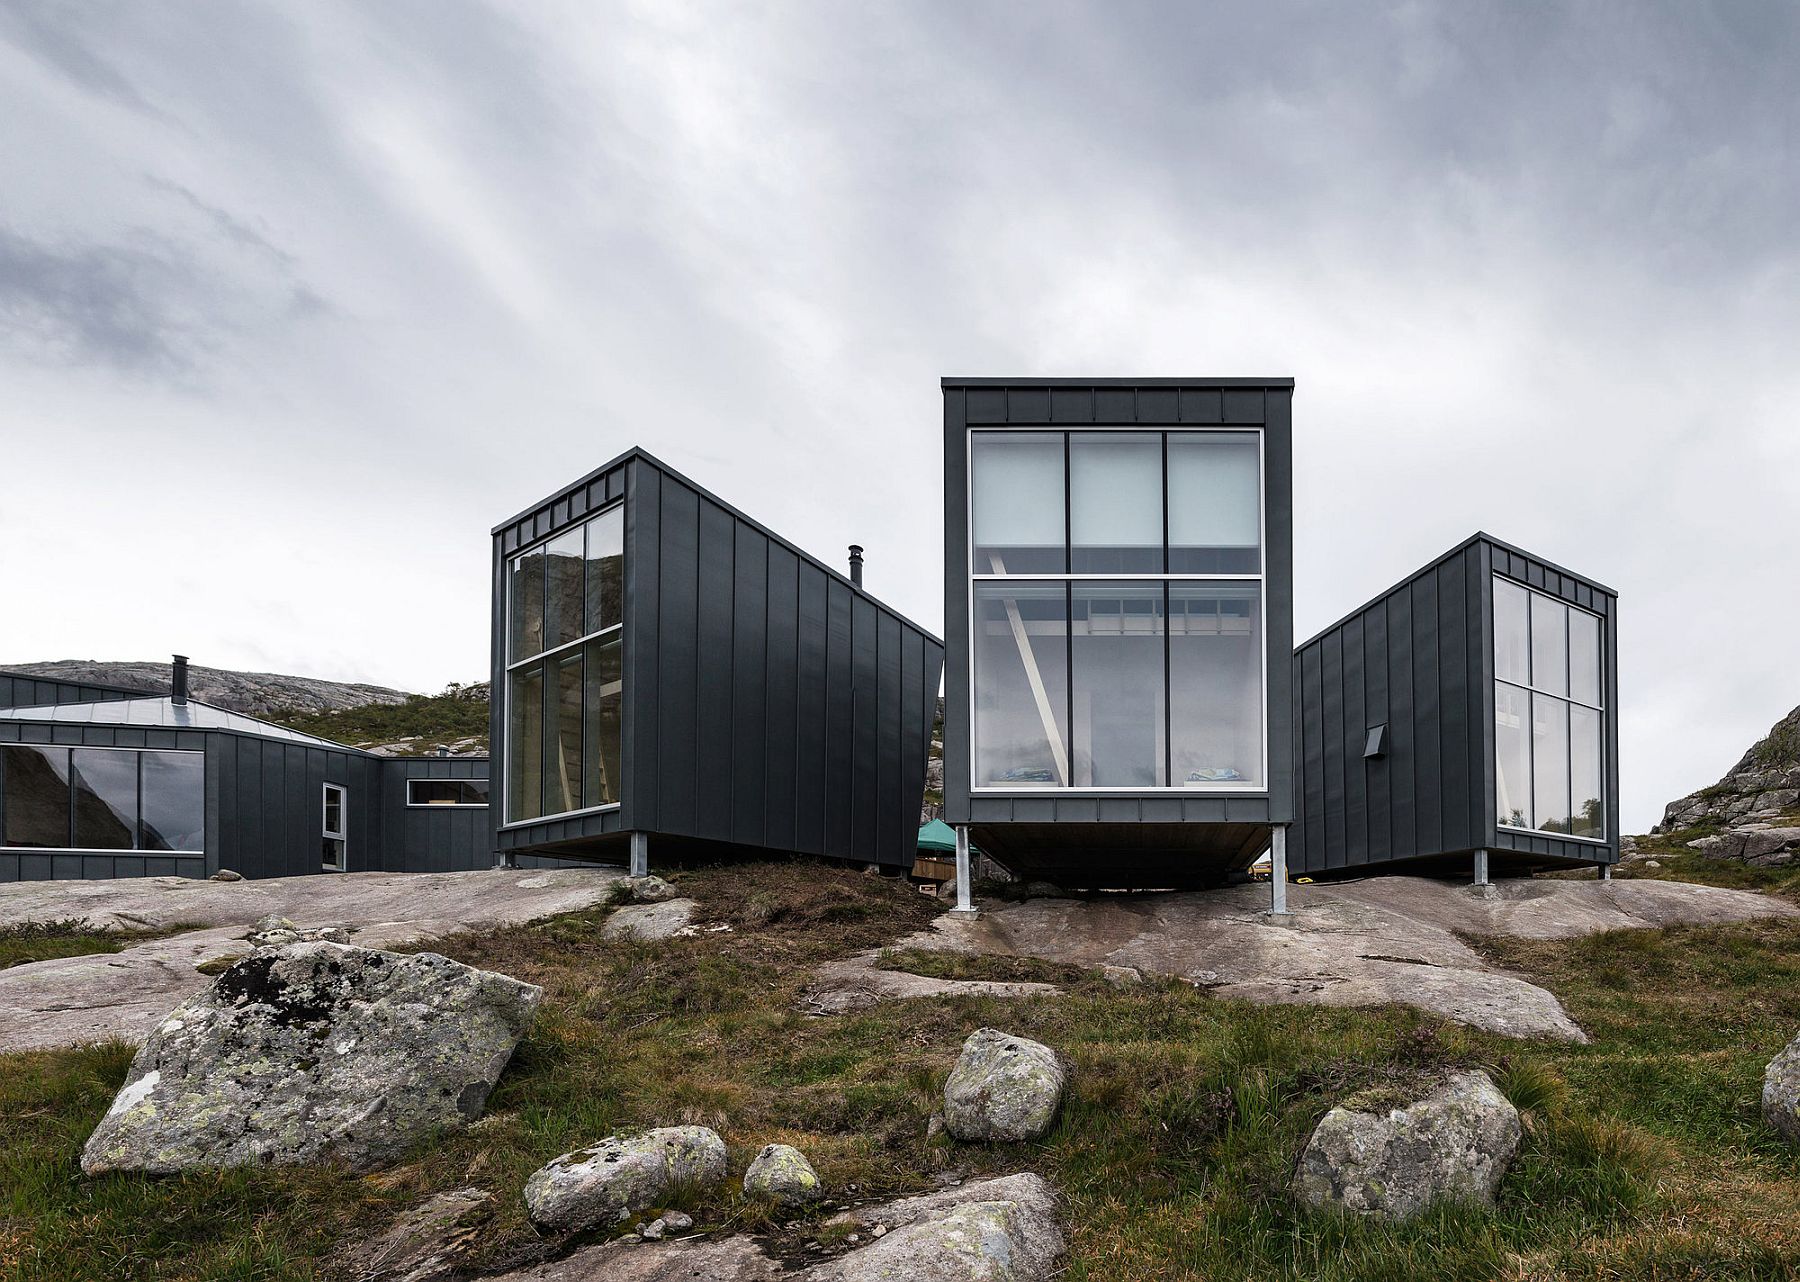 Rolled zinc provides durable and dramatic exterior surface for the cabins